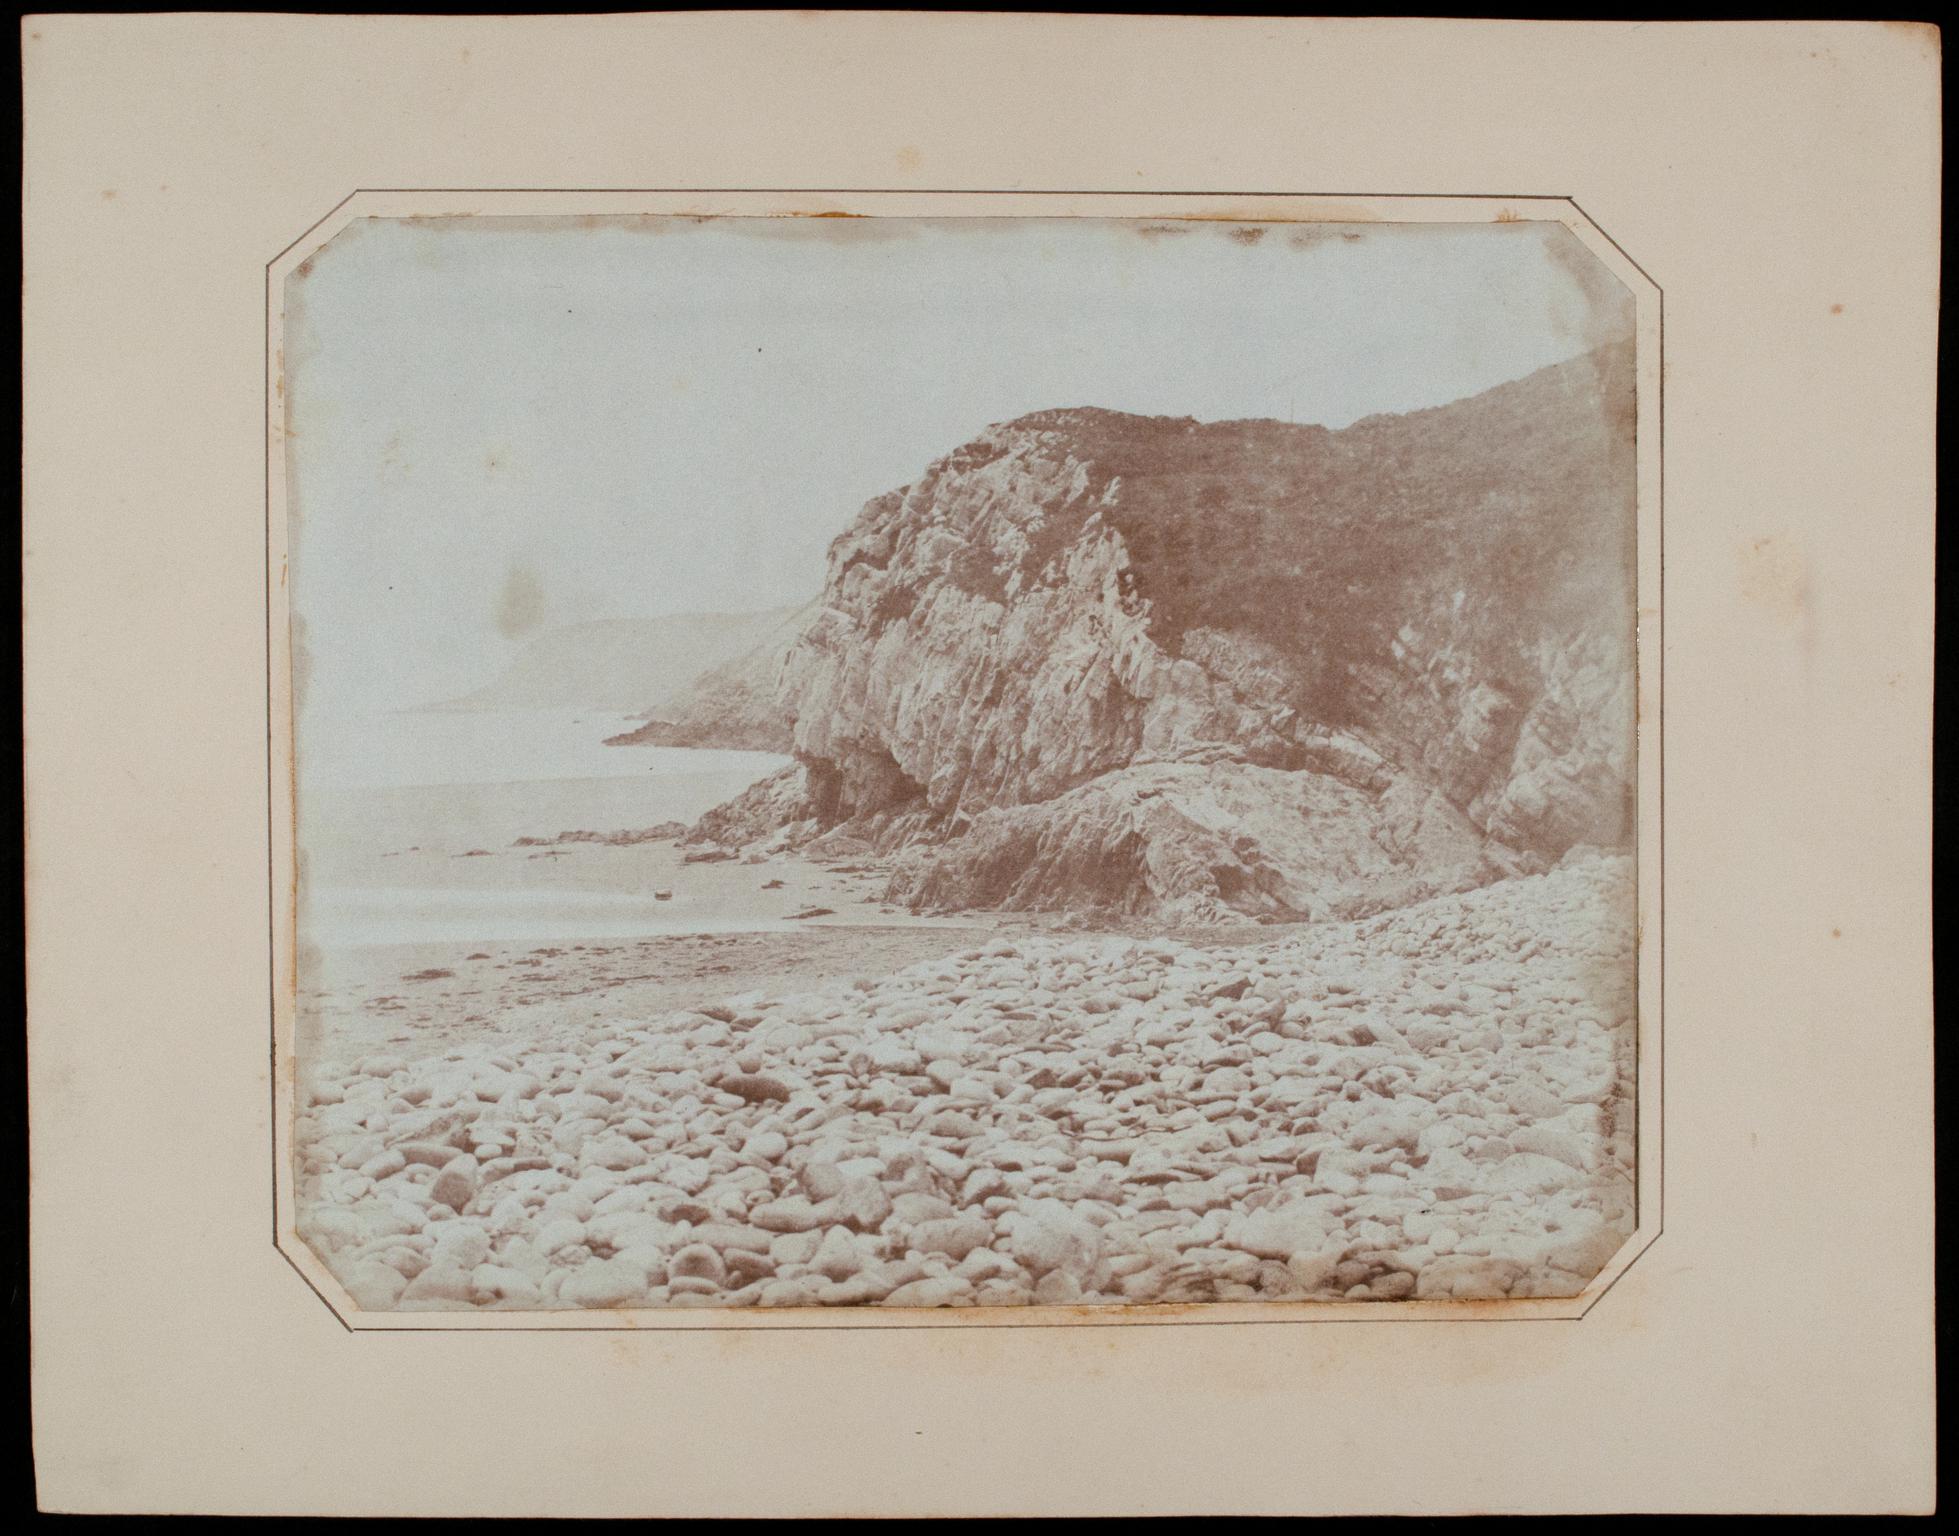 Caswell Bay, photograph